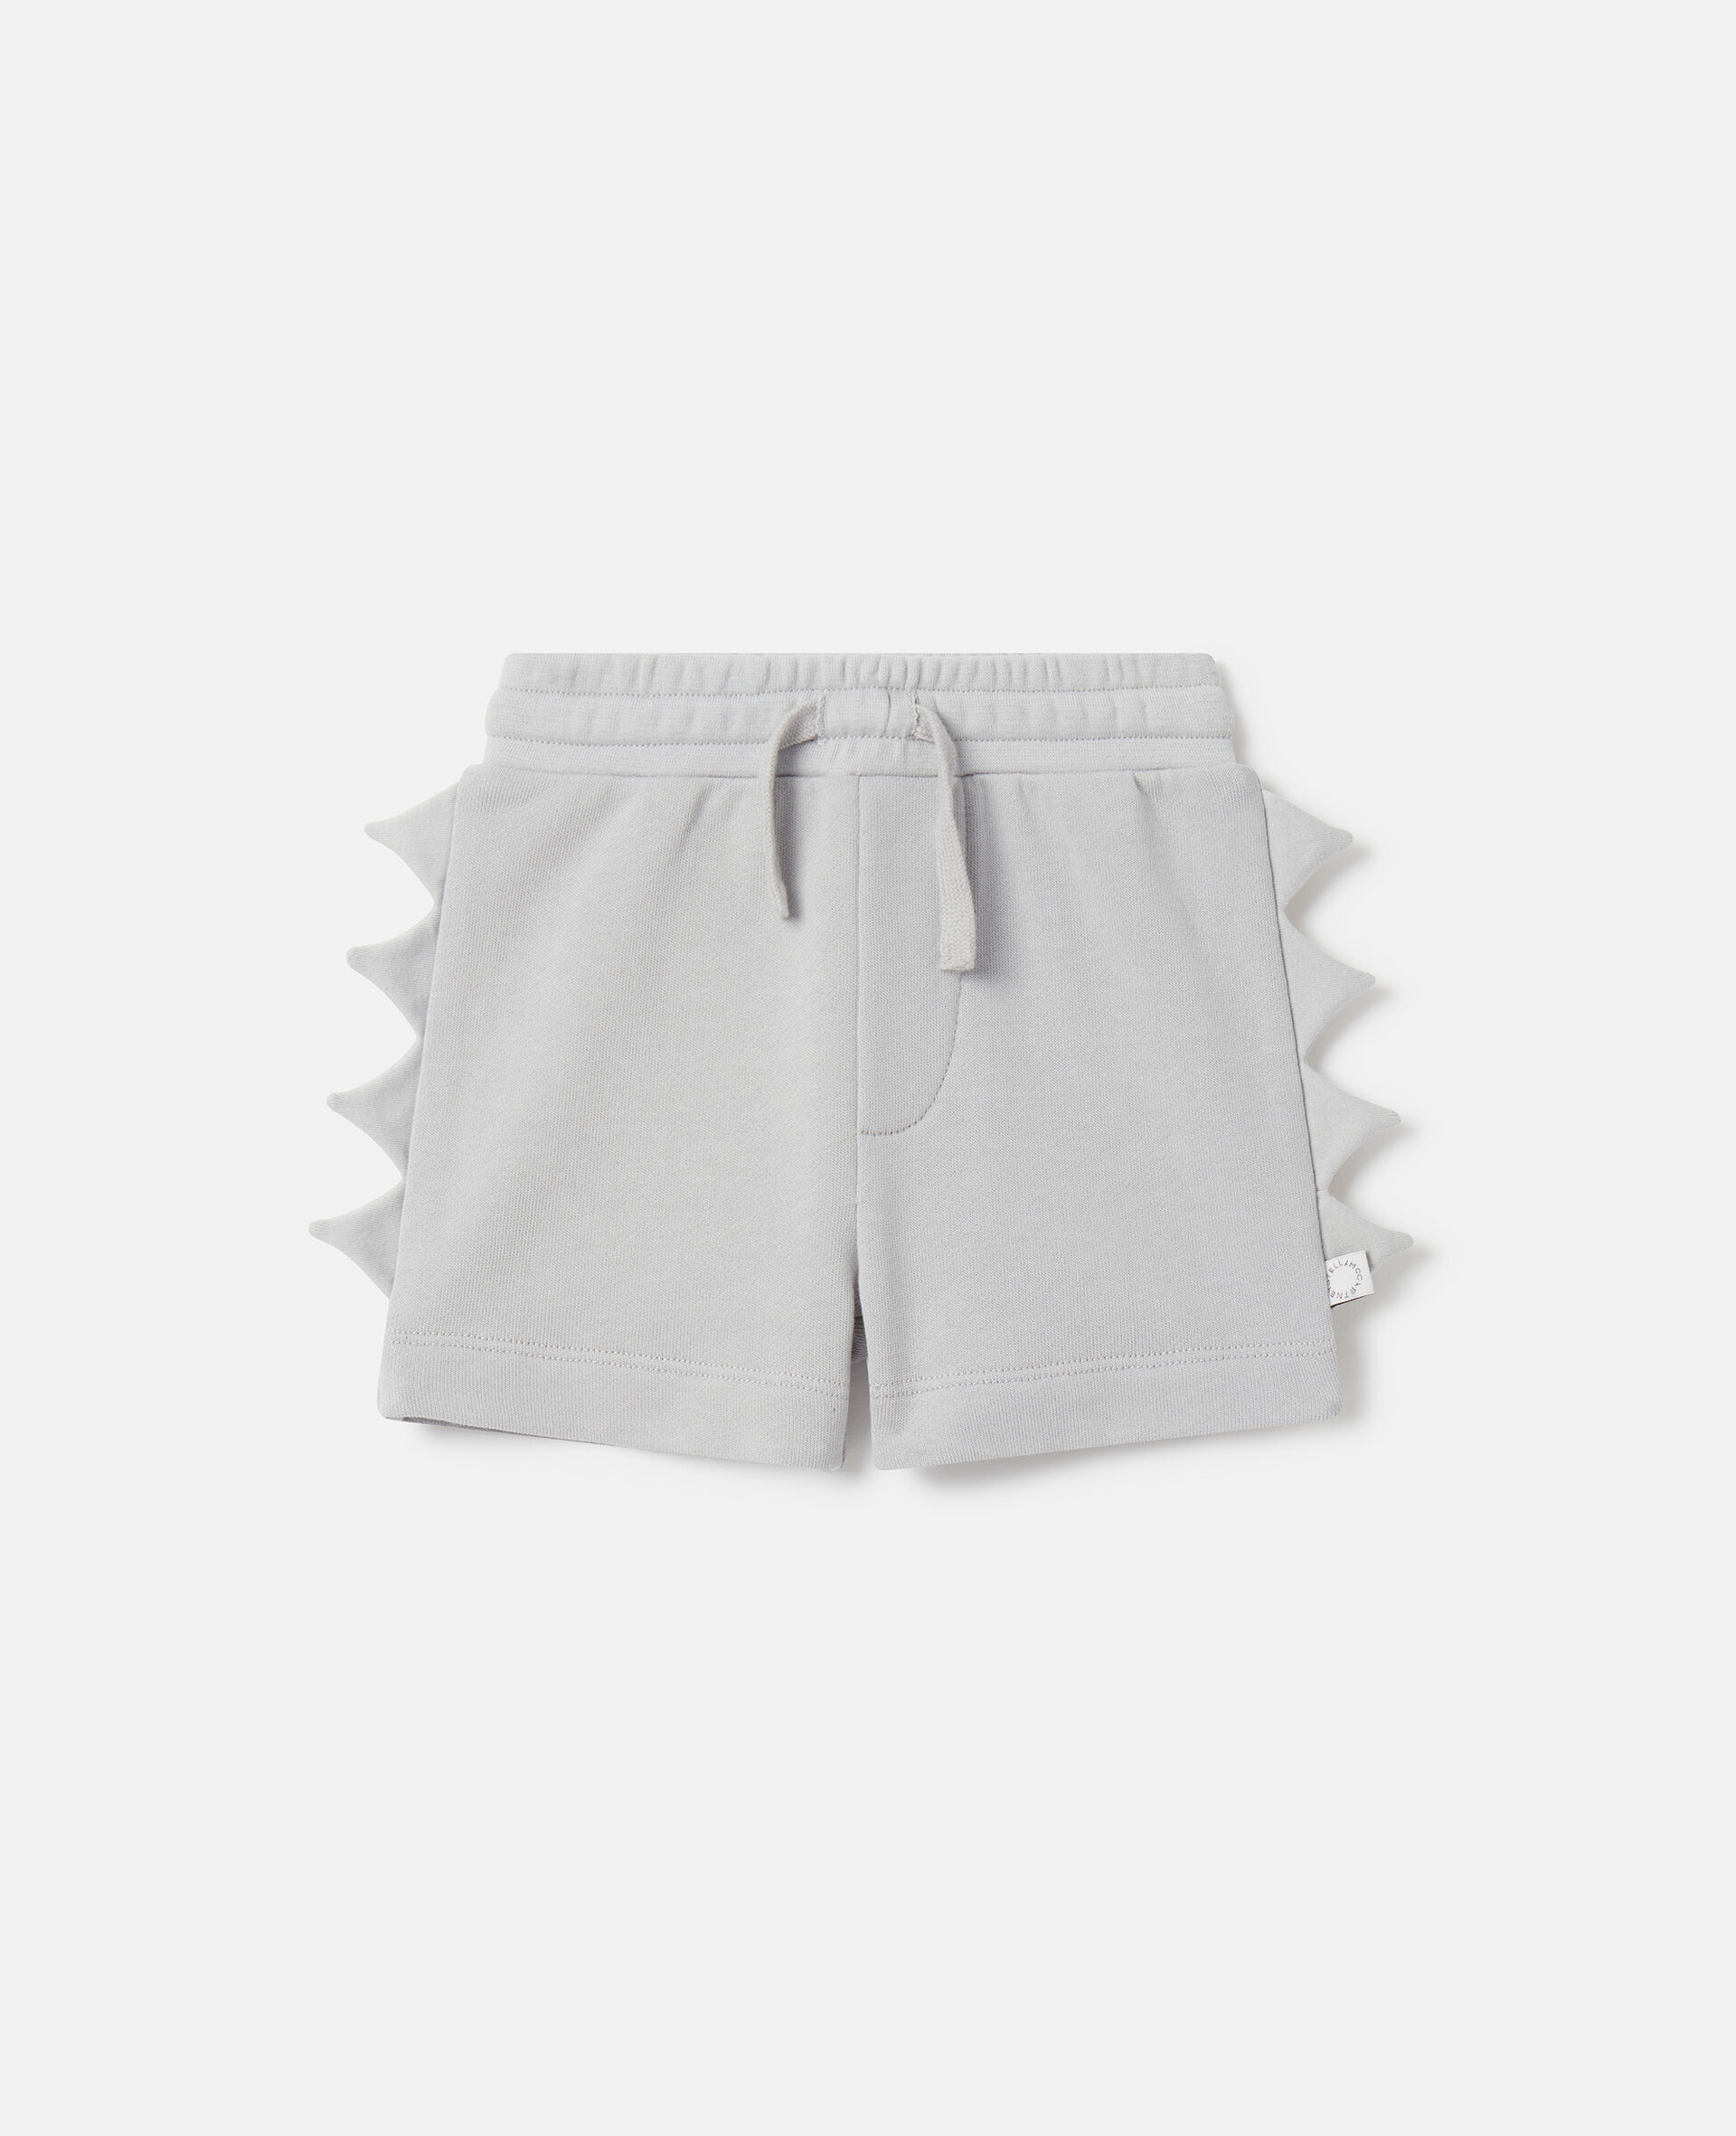 Shark Fin Spike Shorts-그레이-large image number 0